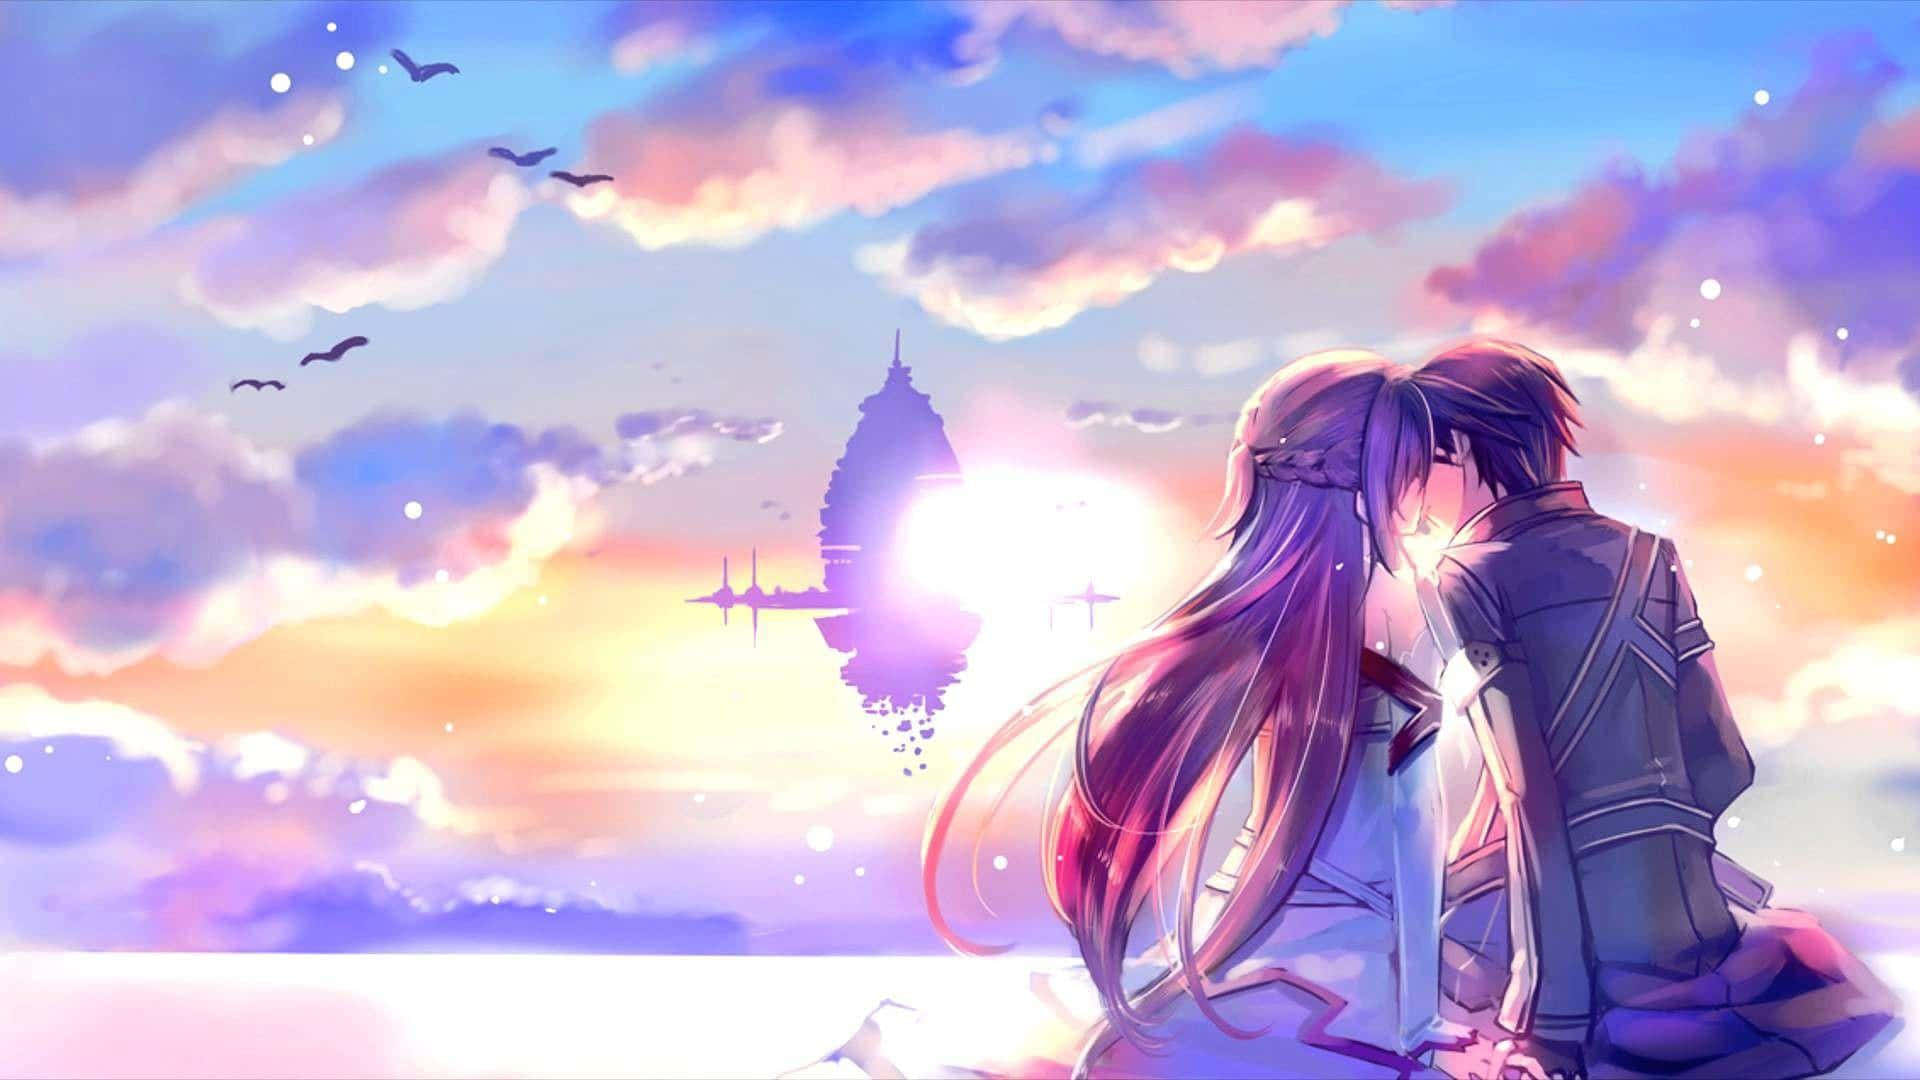 Anime Couple Kissing In The Sky